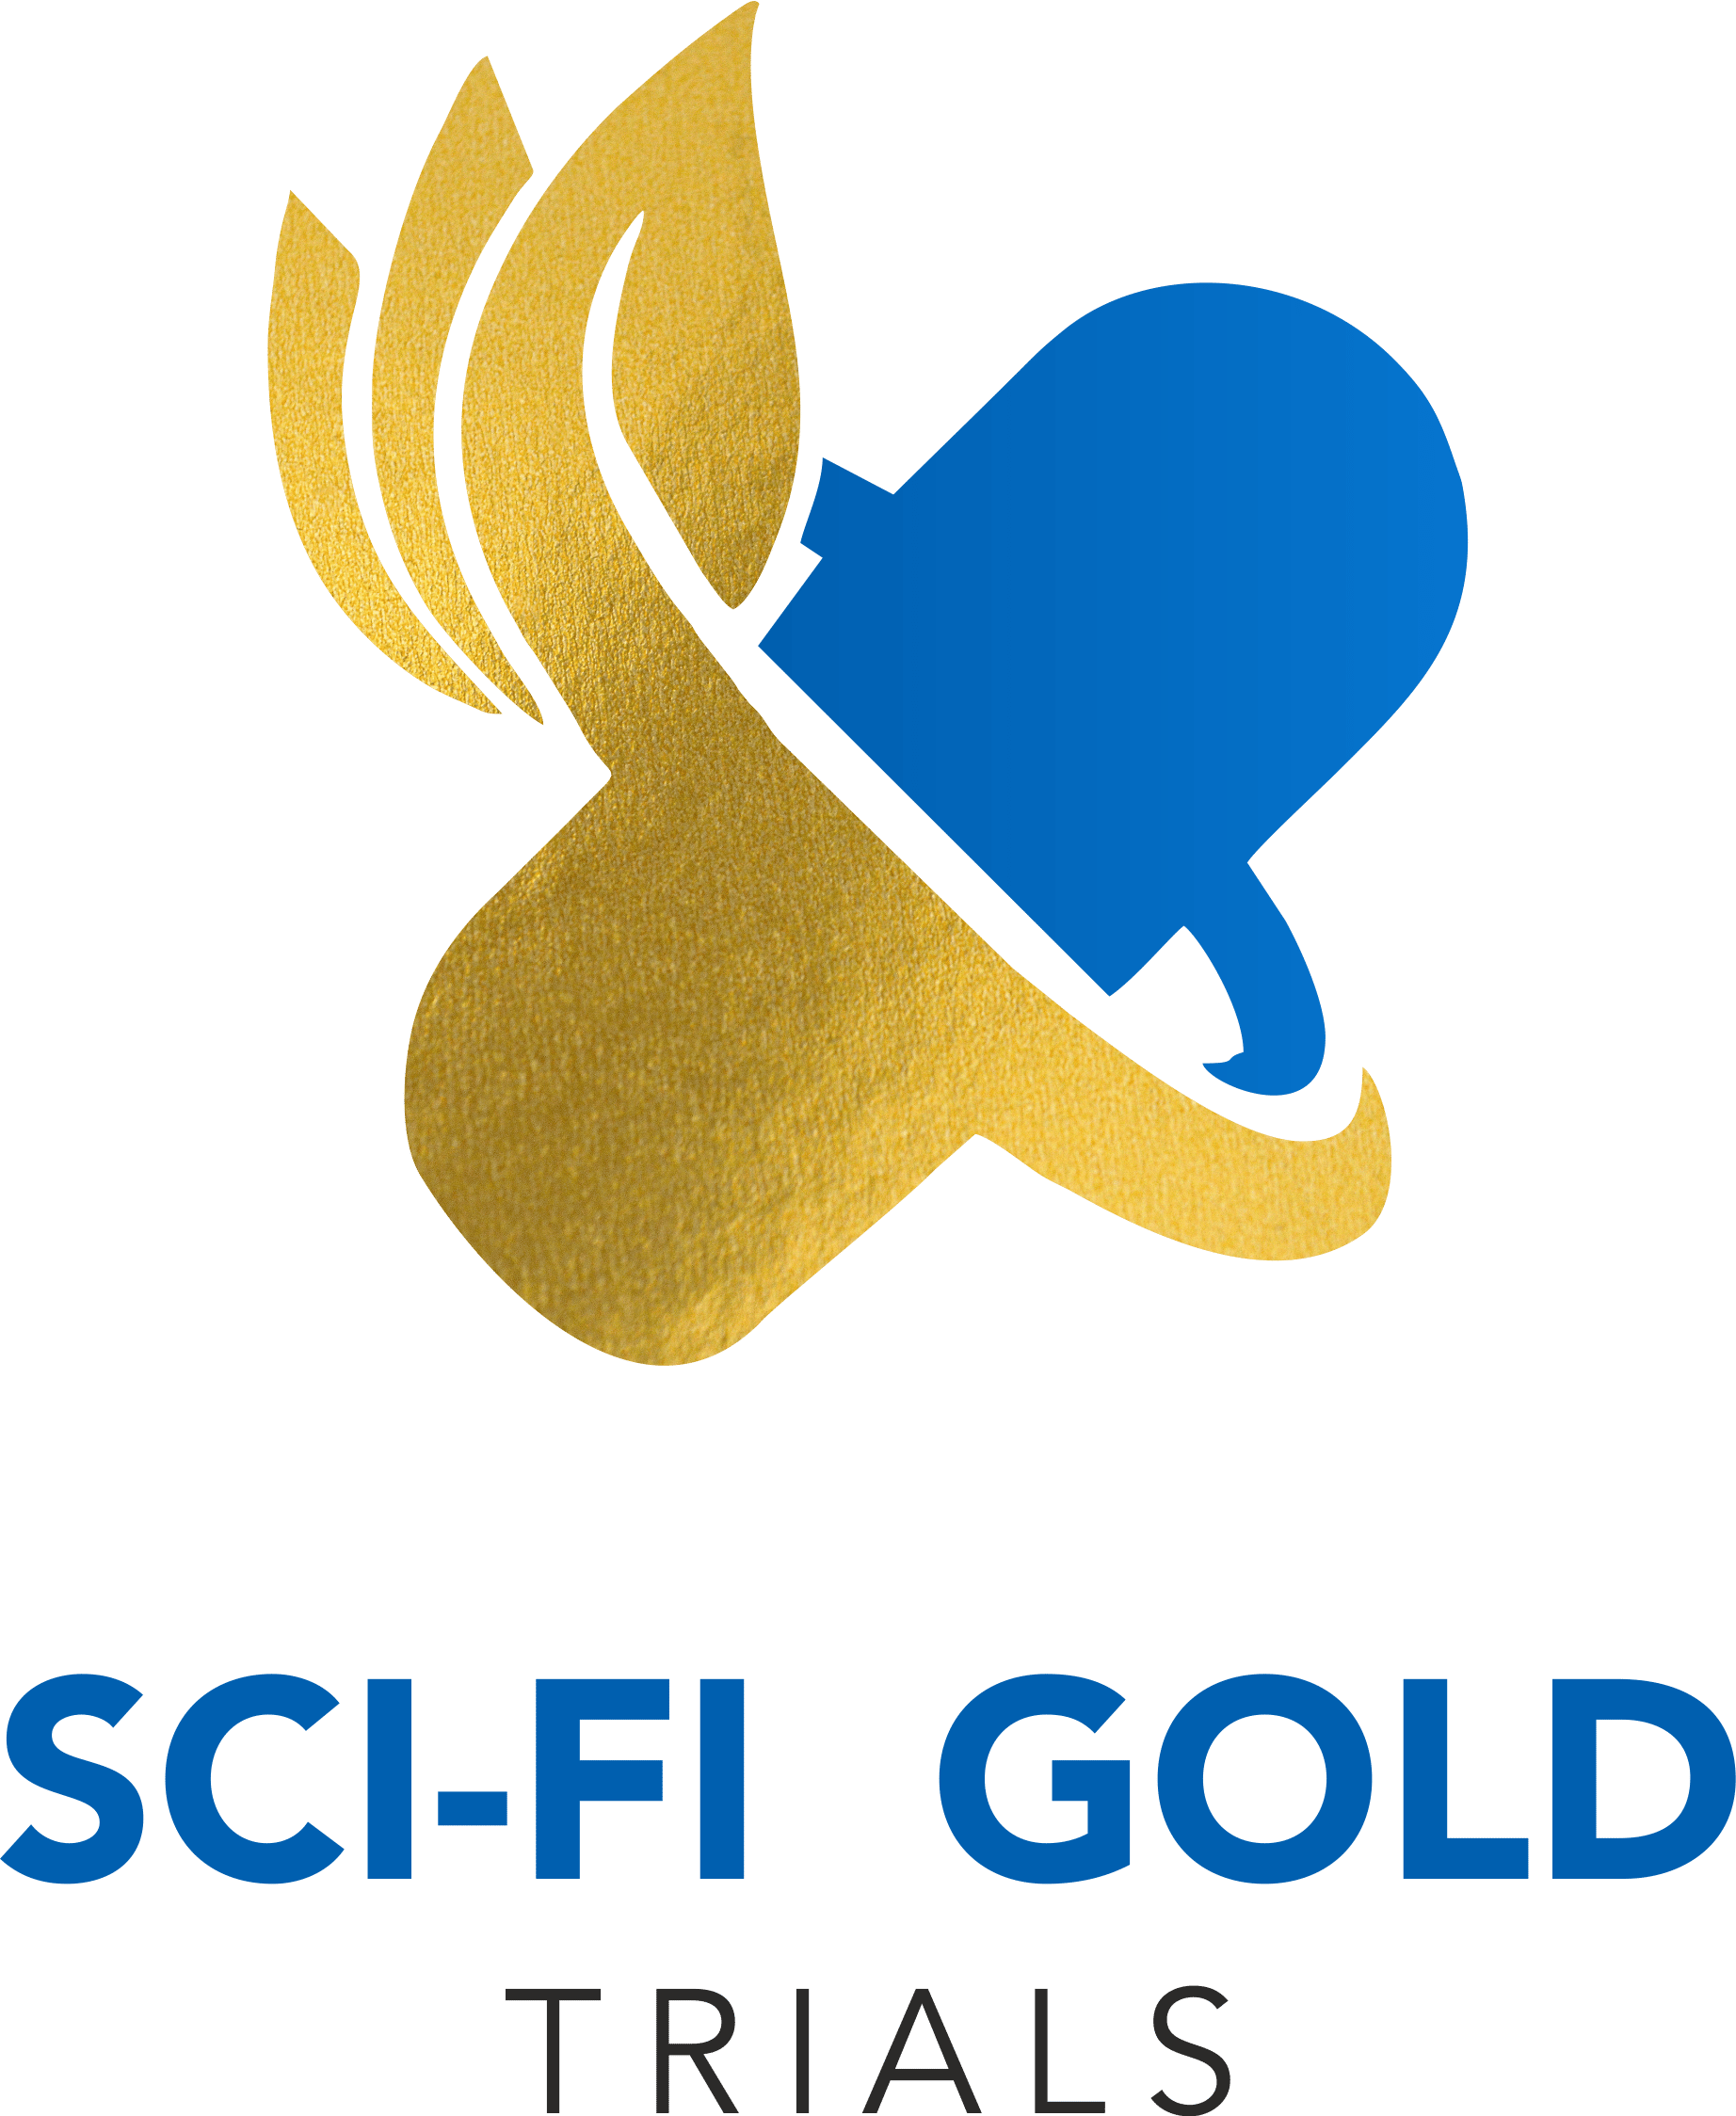 Become a clinical research associate with Sci-Fi Gold Trials